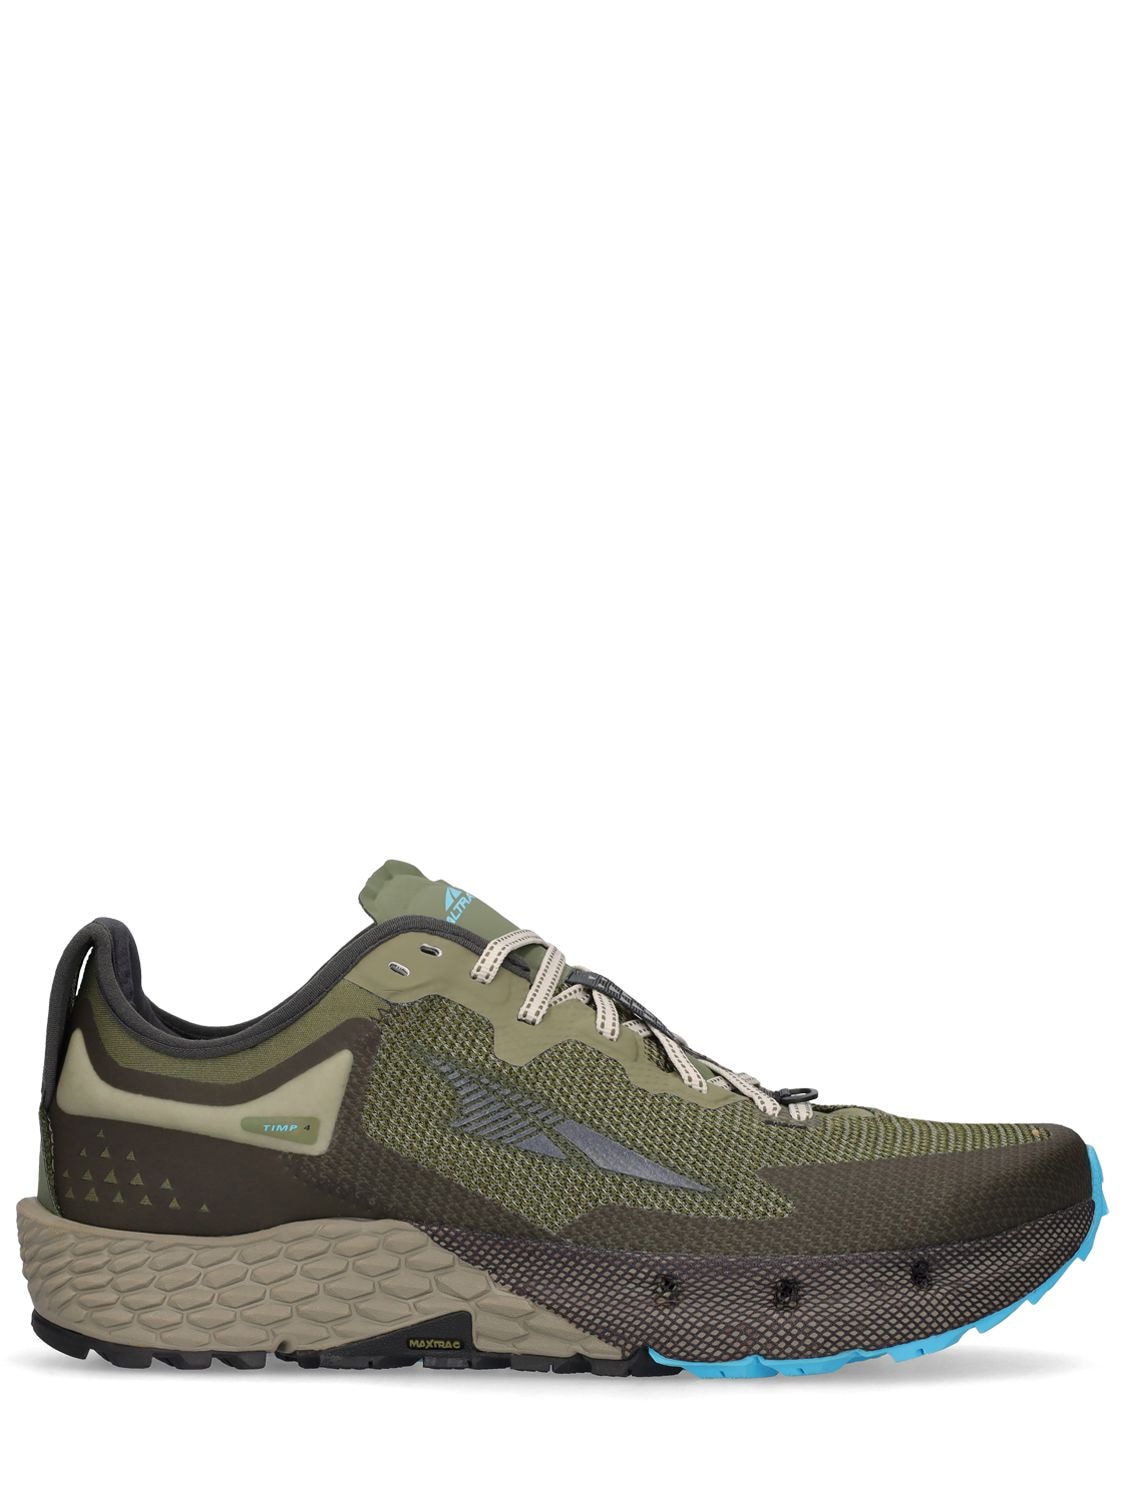 Altra Running Timp 4 Trail Running Sneakers In Dusty Olive